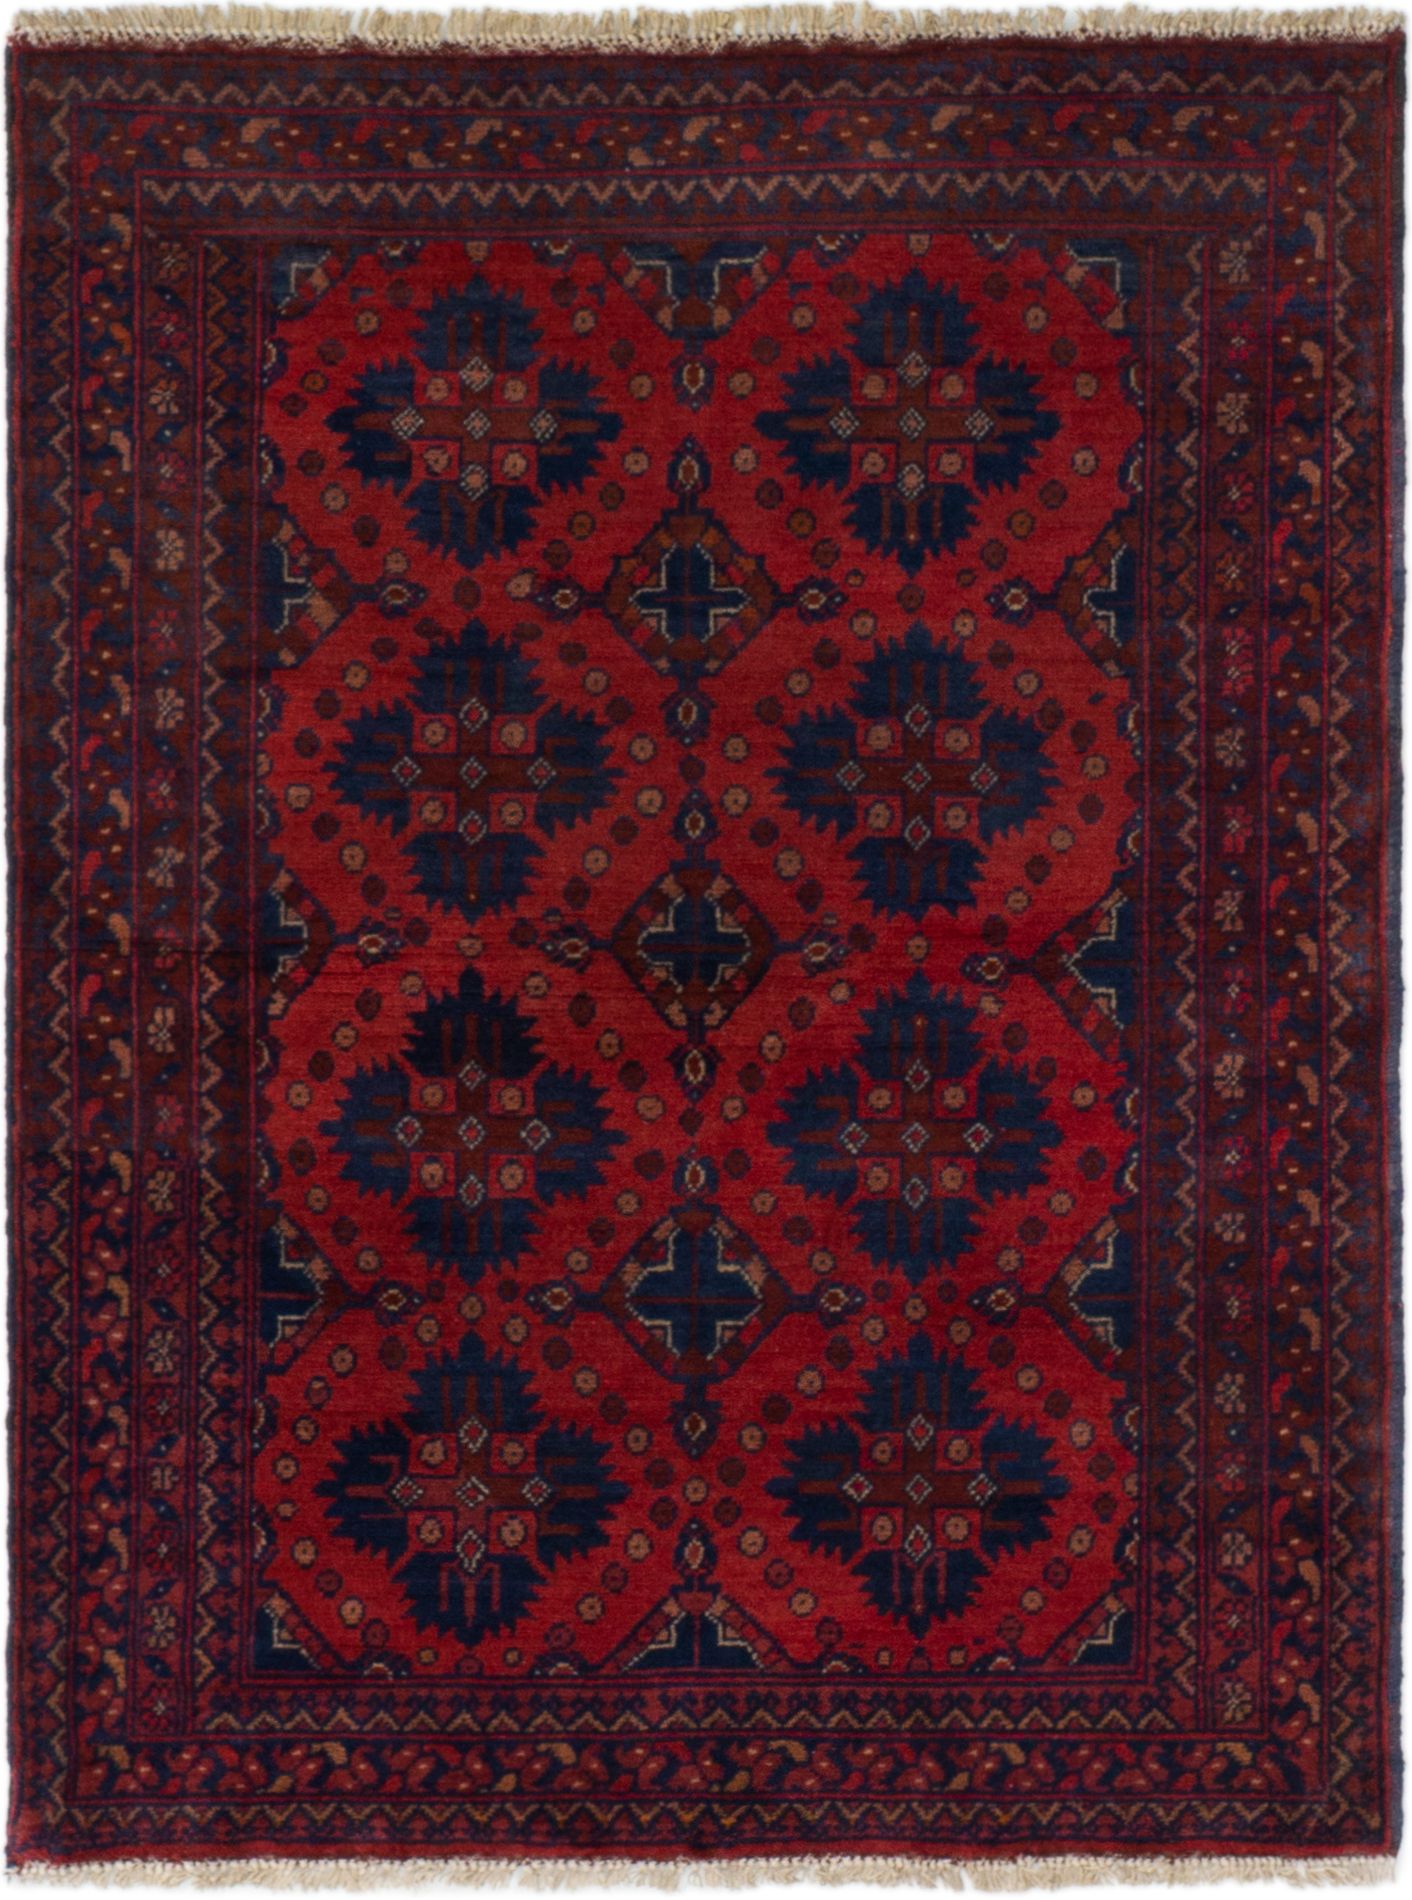 Hand-knotted Finest Khal Mohammadi Red Wool Rug 3'6" x 4'8"  Size: 3'6" x 4'8"  